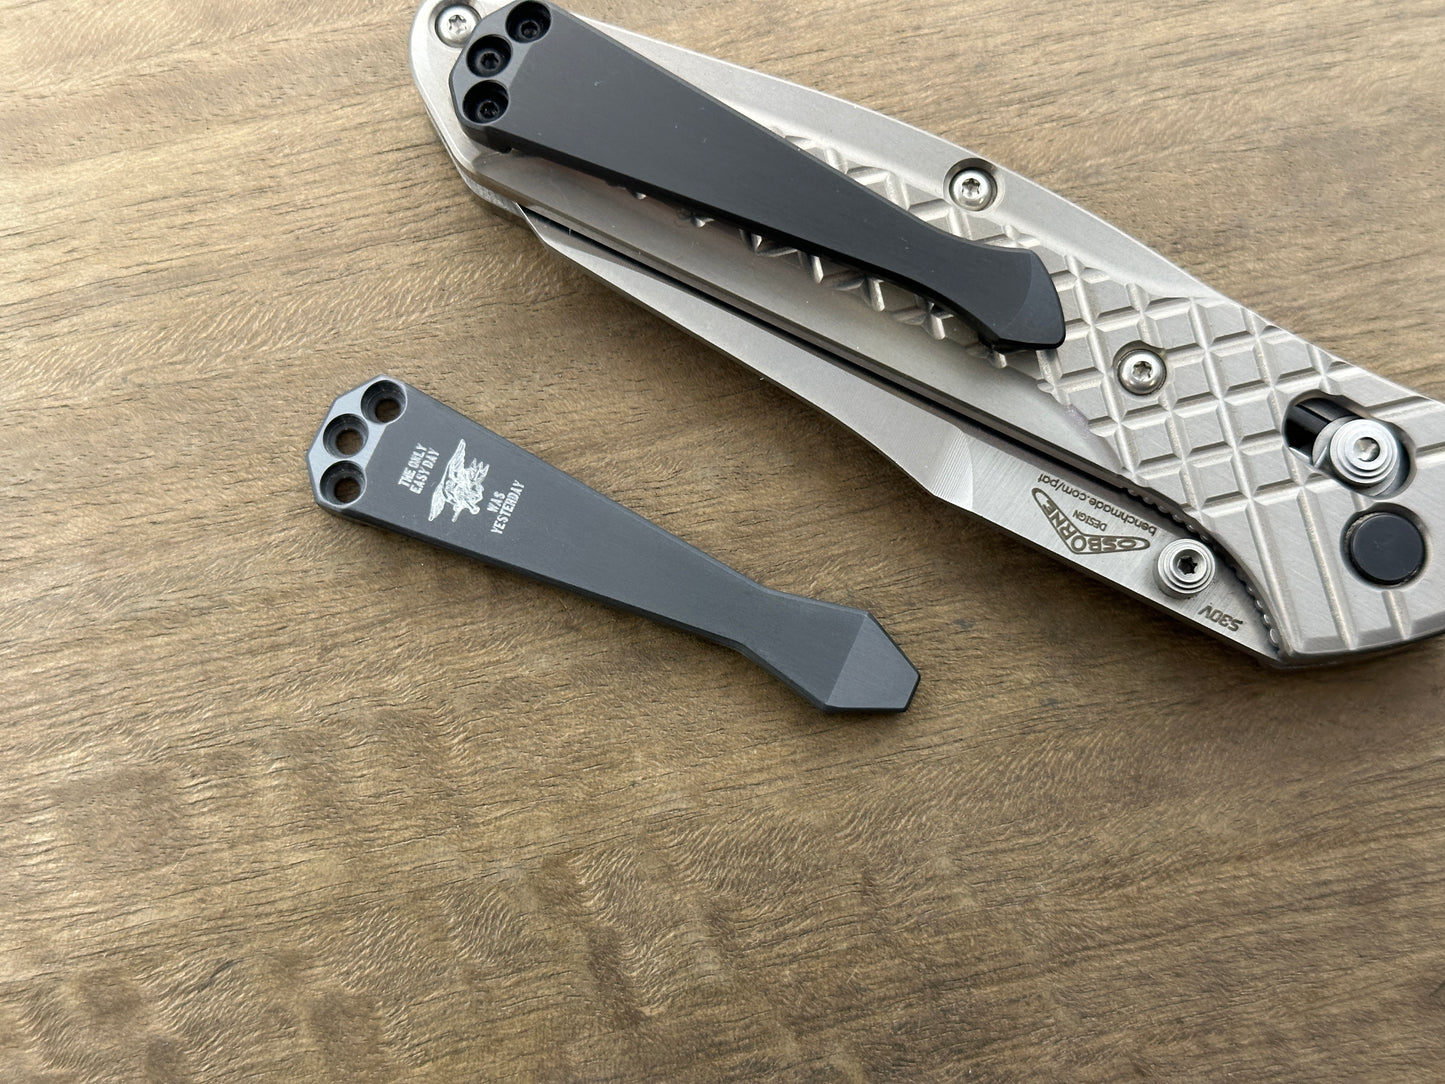 US NAVY Seals "The only easy Day was Yesterday" D Zirconium CLIP for Benchmade